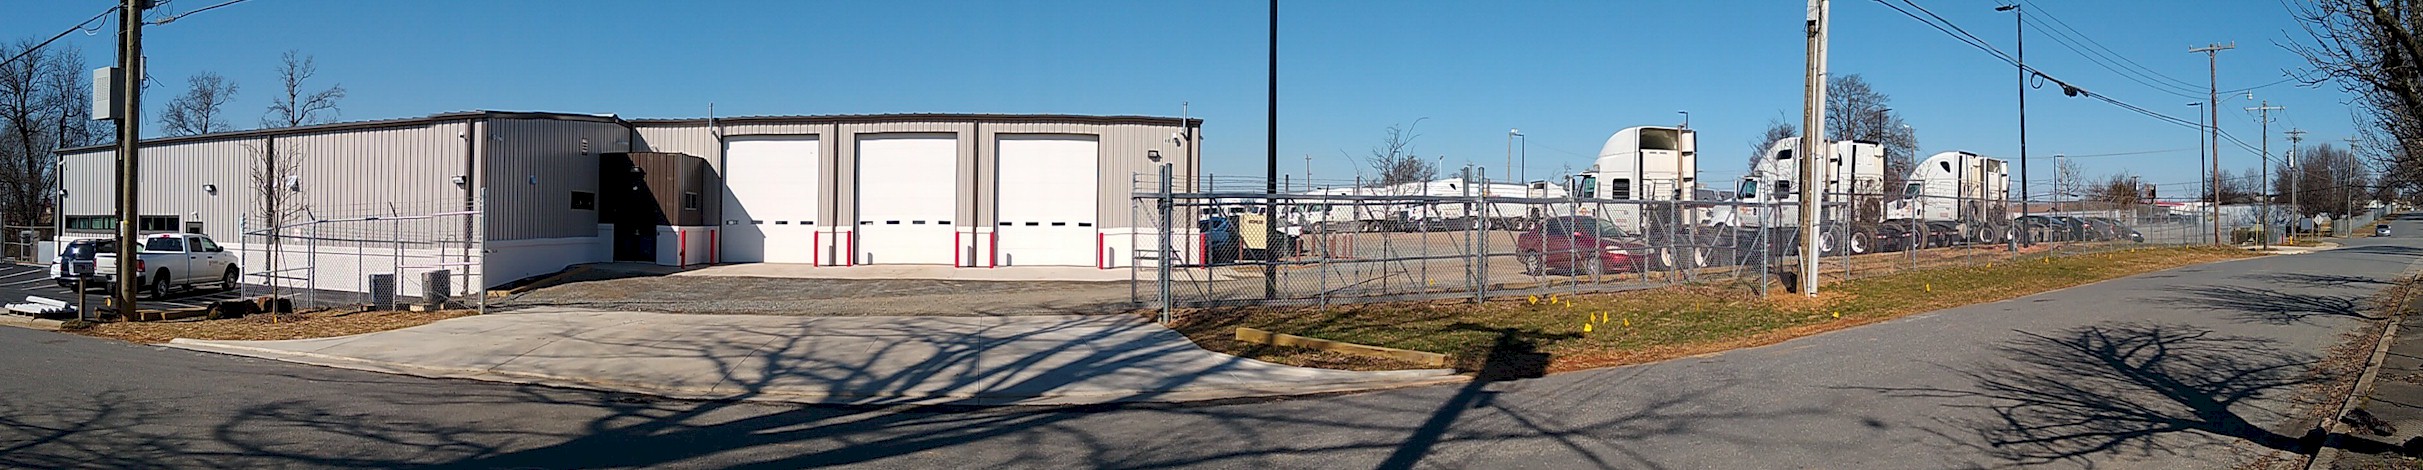 Barr-Nunn Charlotte, NC truck terminal building showing maintanence area and service bays